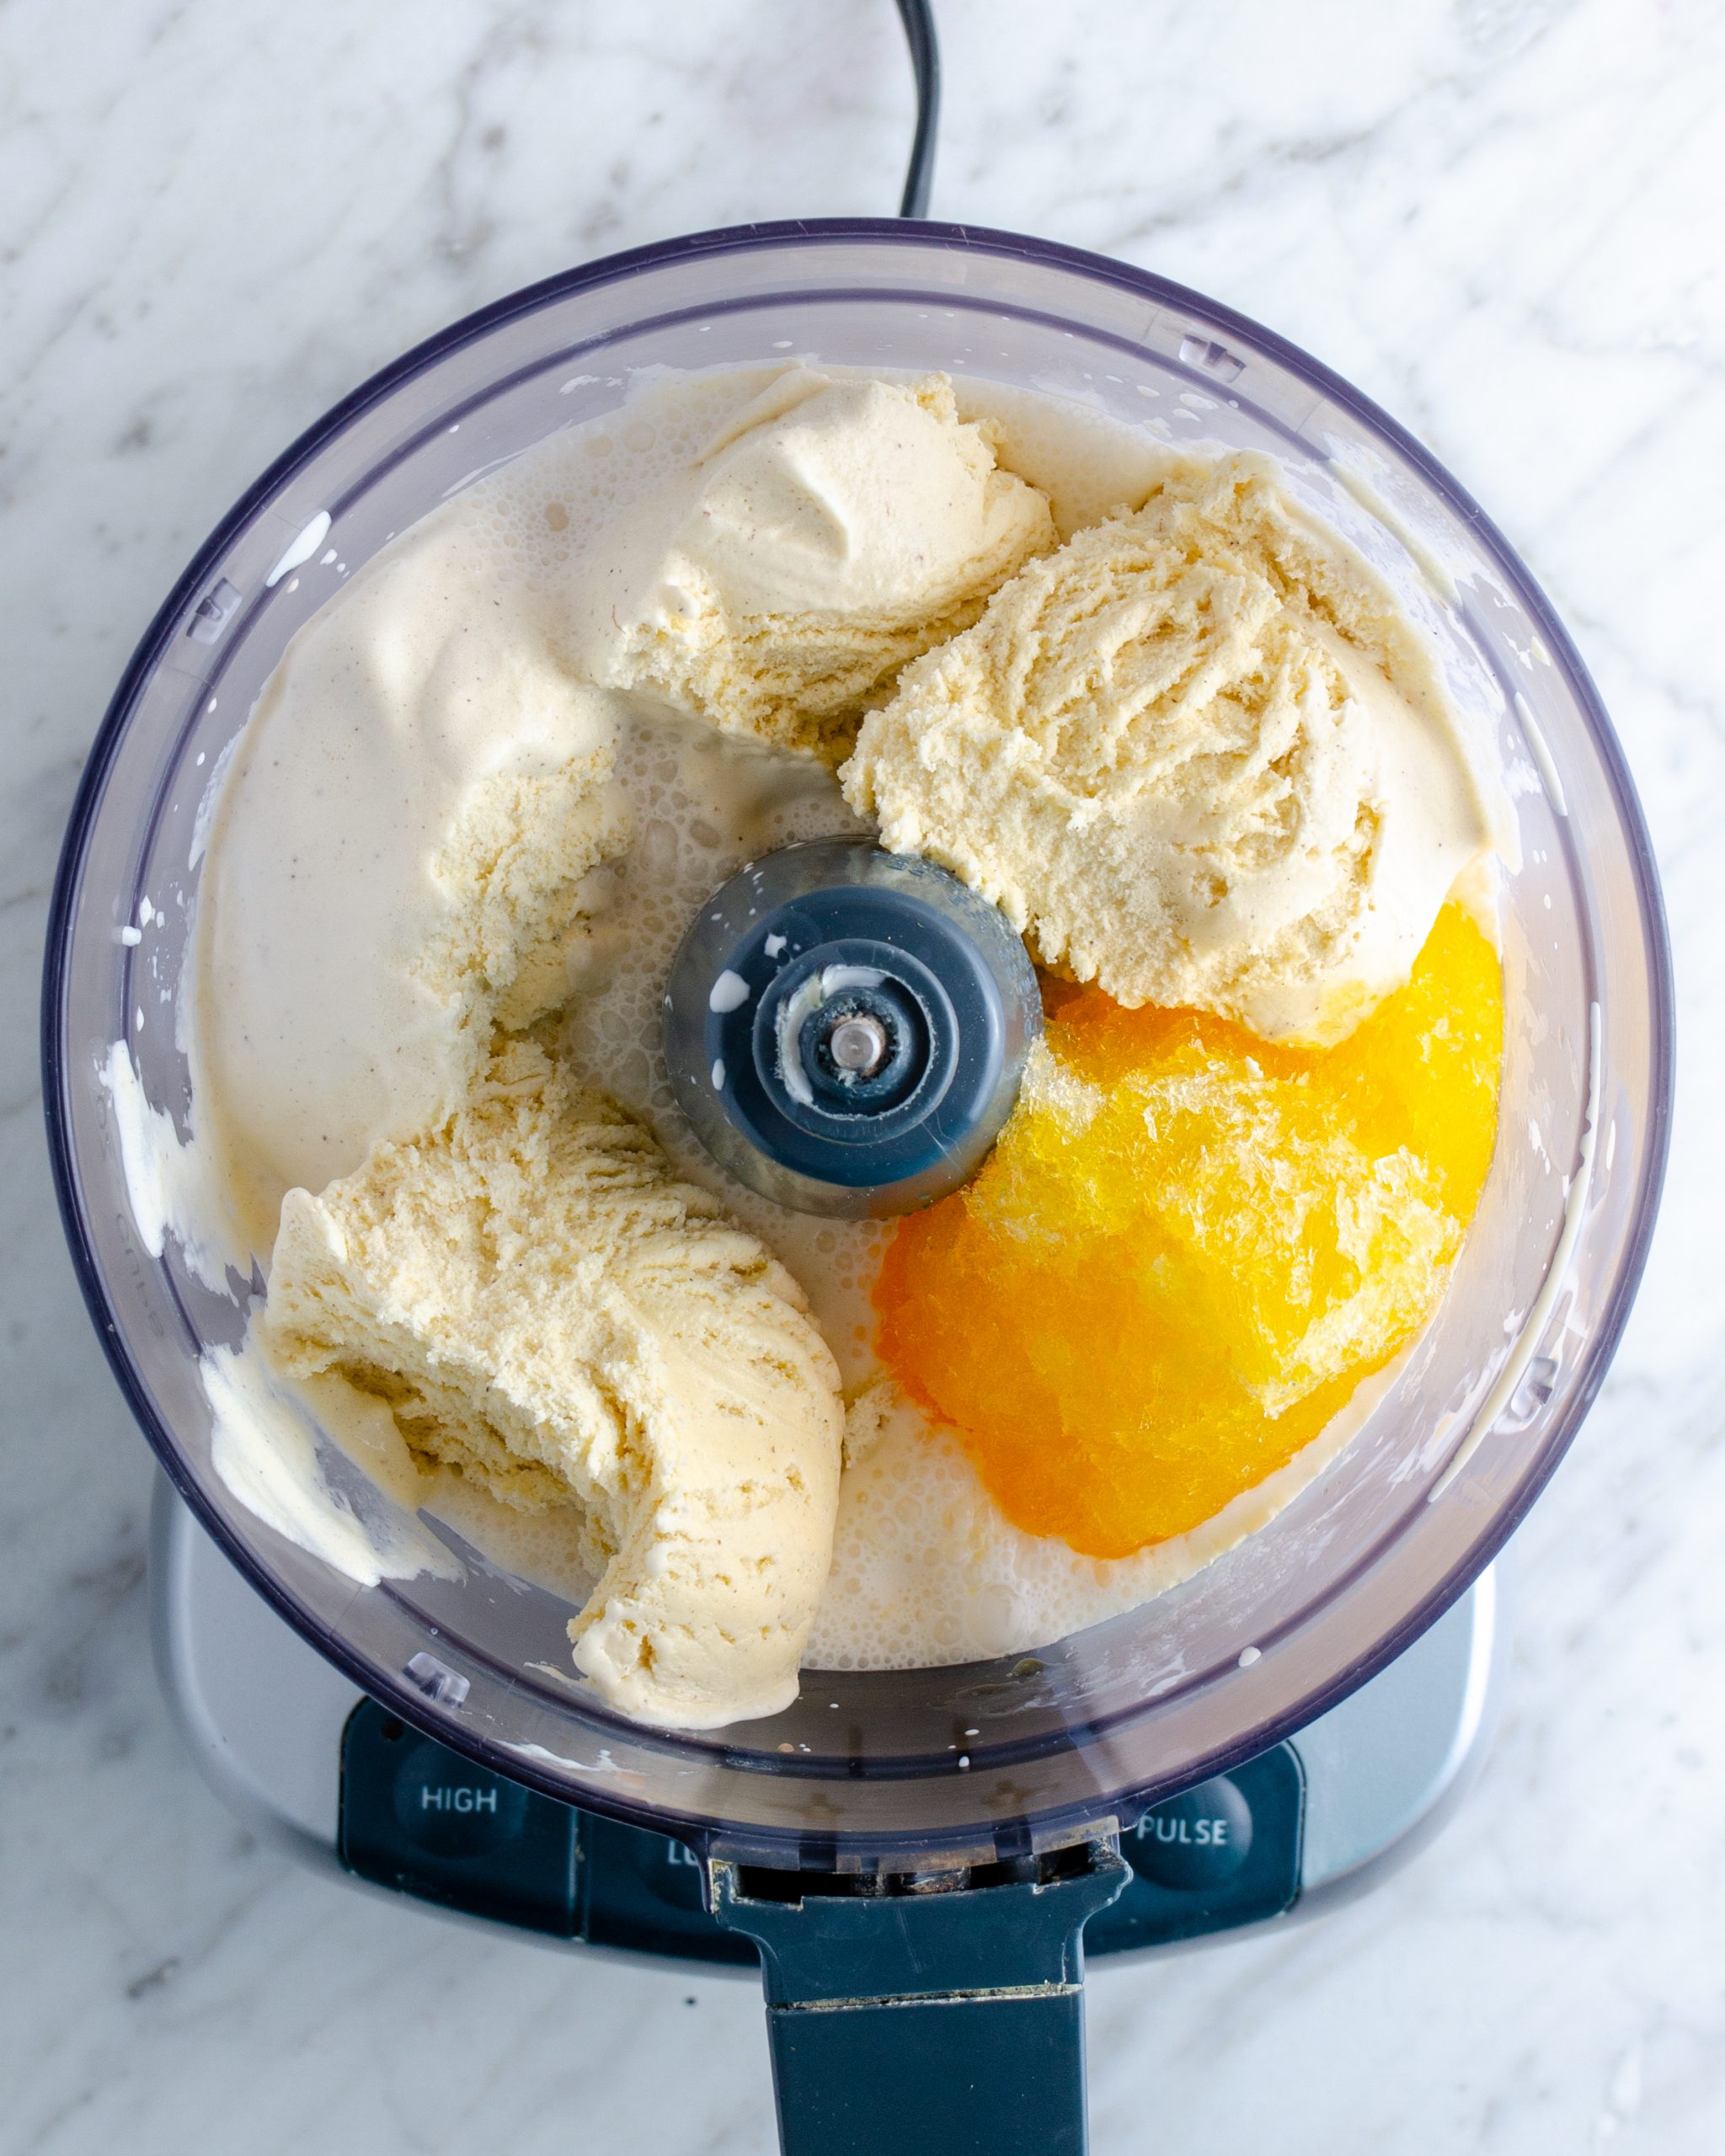 Place the ice cream and orange juice concentrate into the blender or food processor.